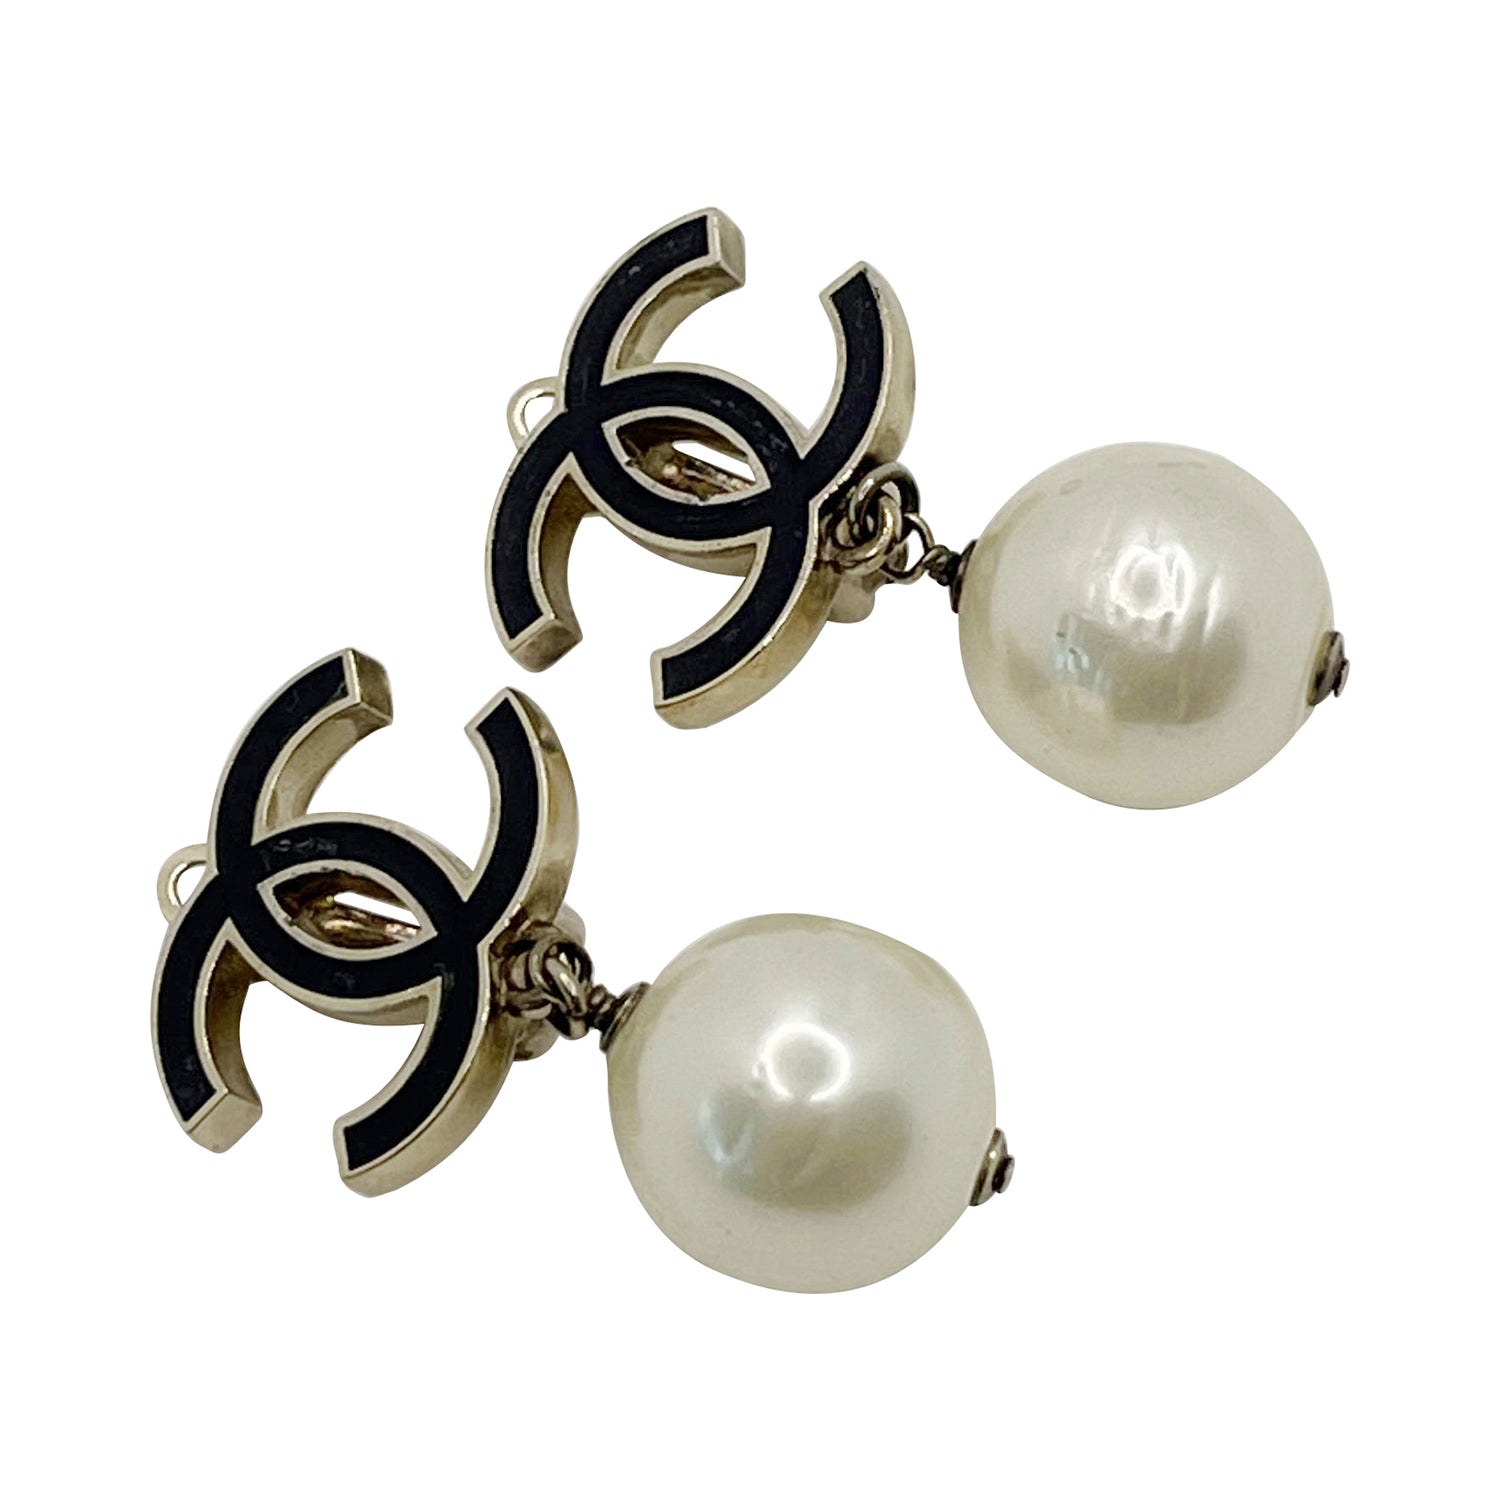 Chanel - Authenticated Earrings - Pearl Silver for Women, Good Condition